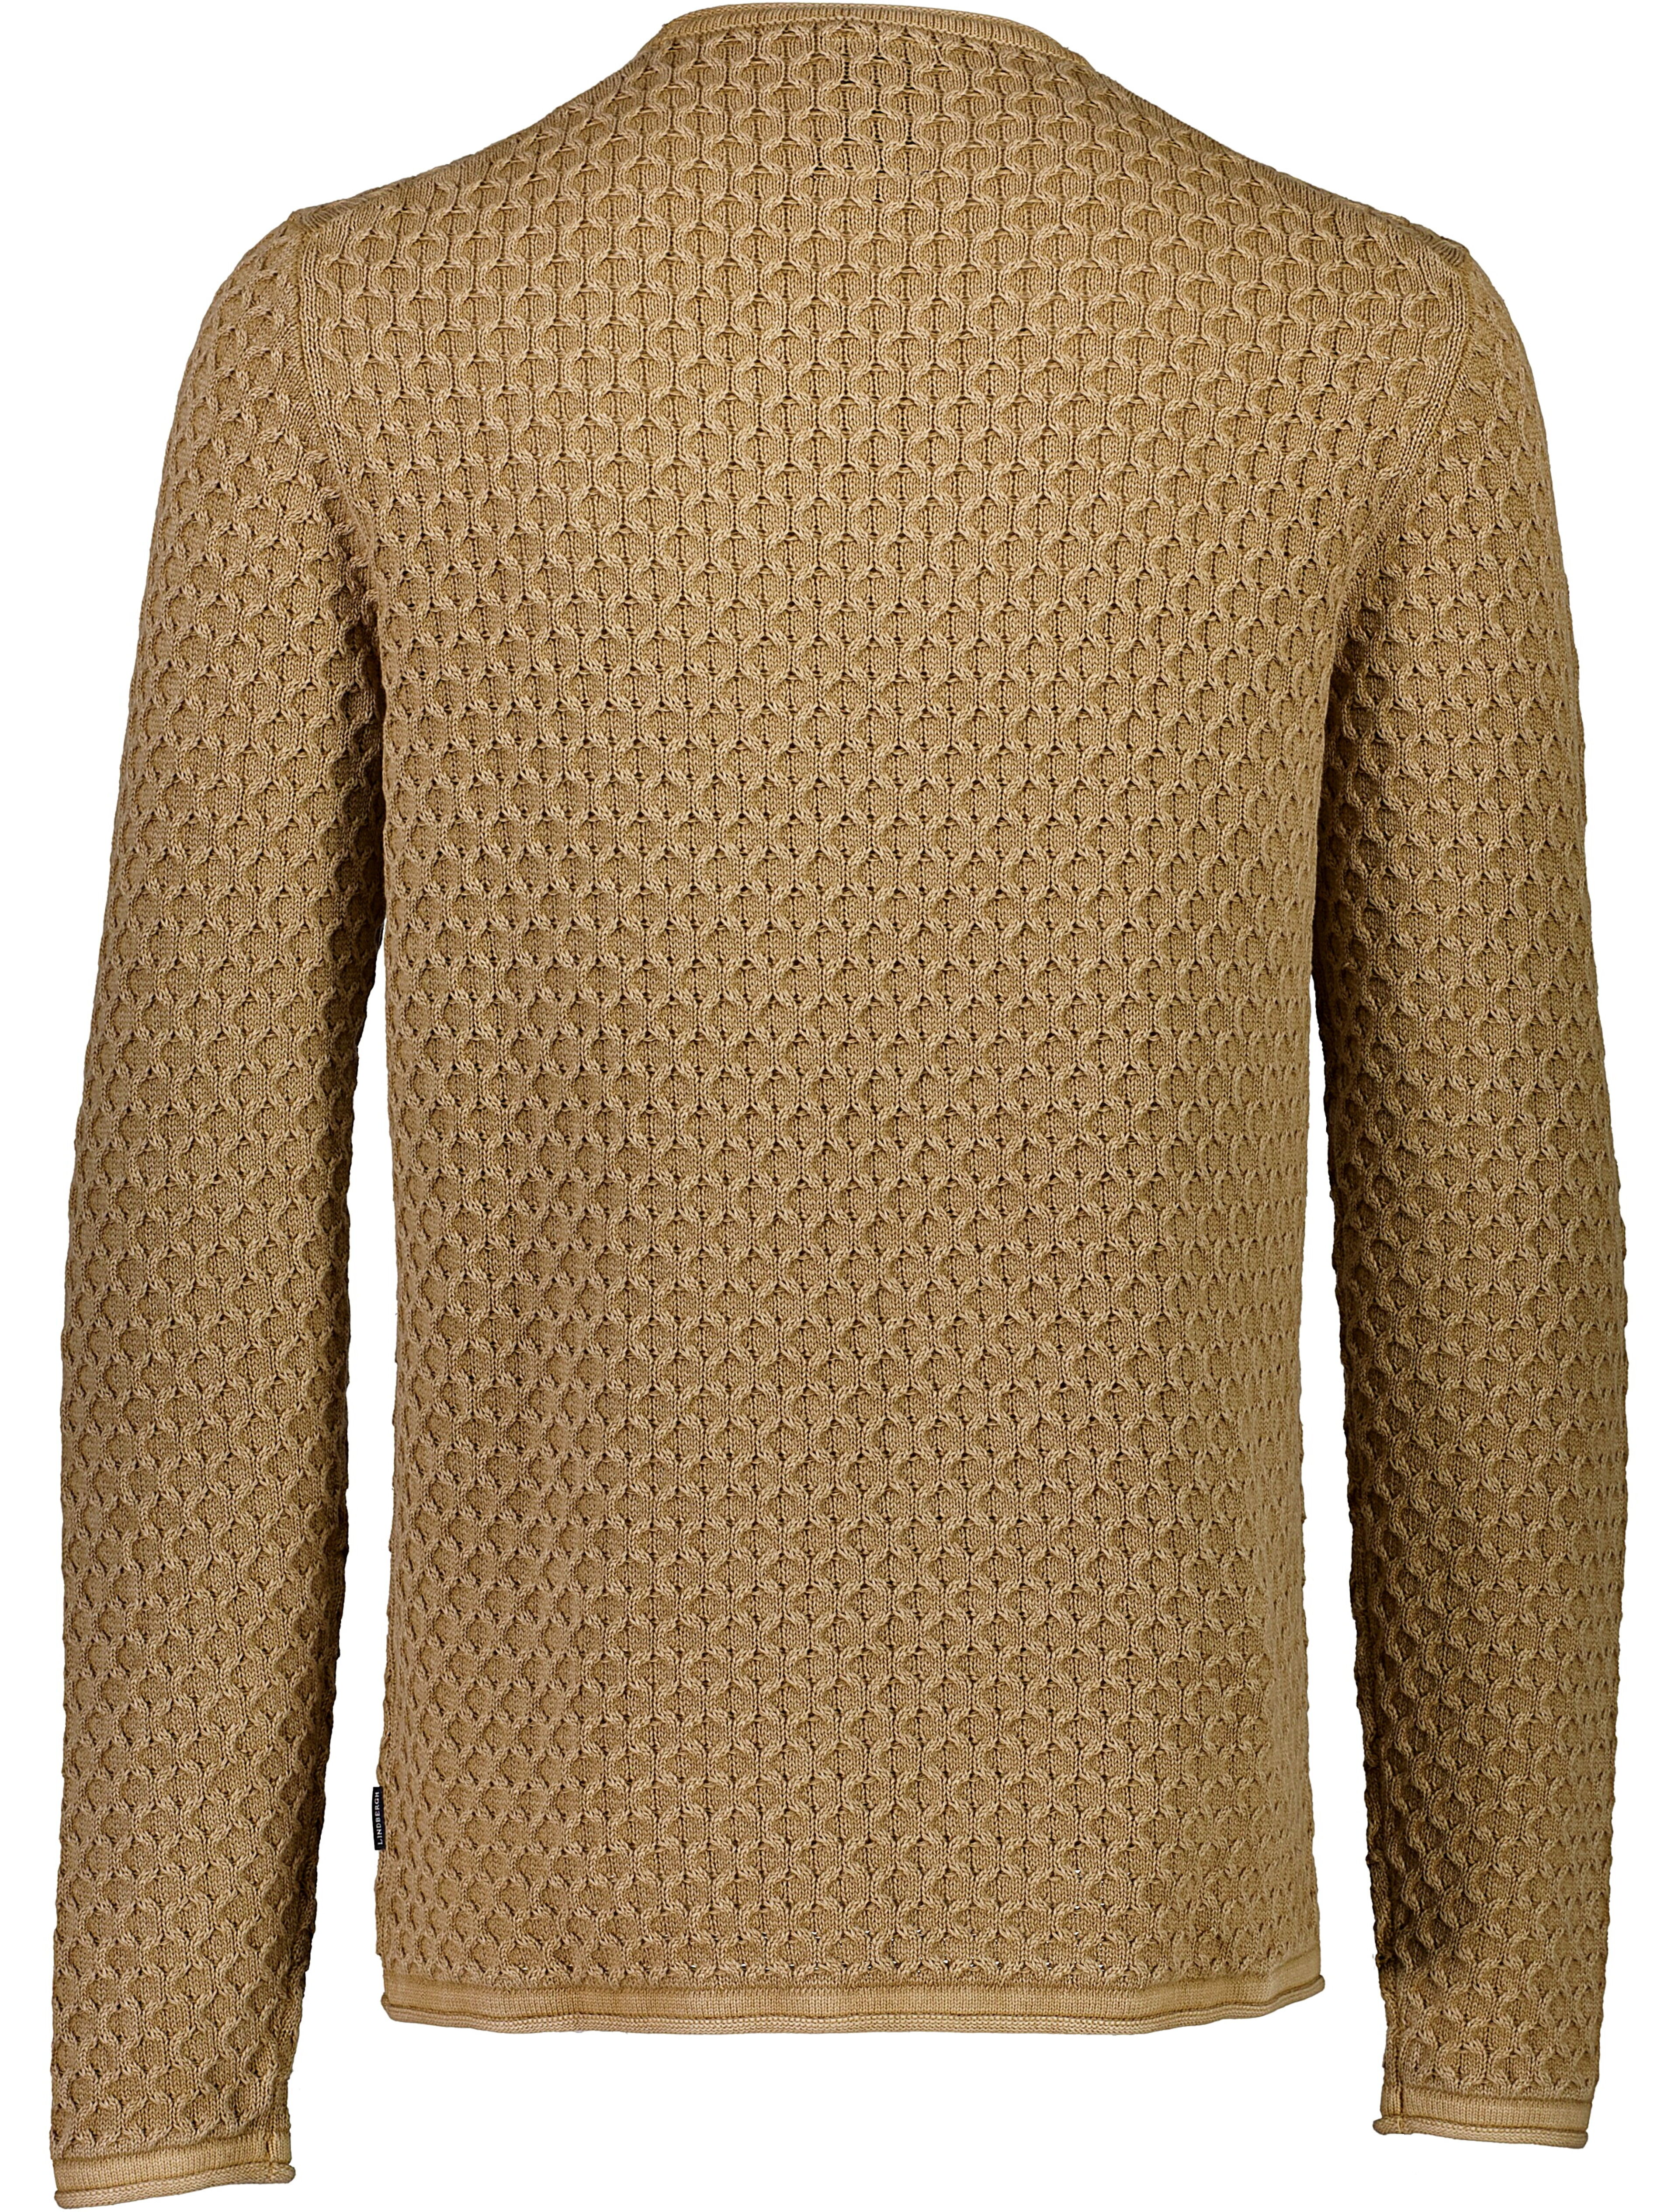 Knitwear | Relaxed fit 30-820064